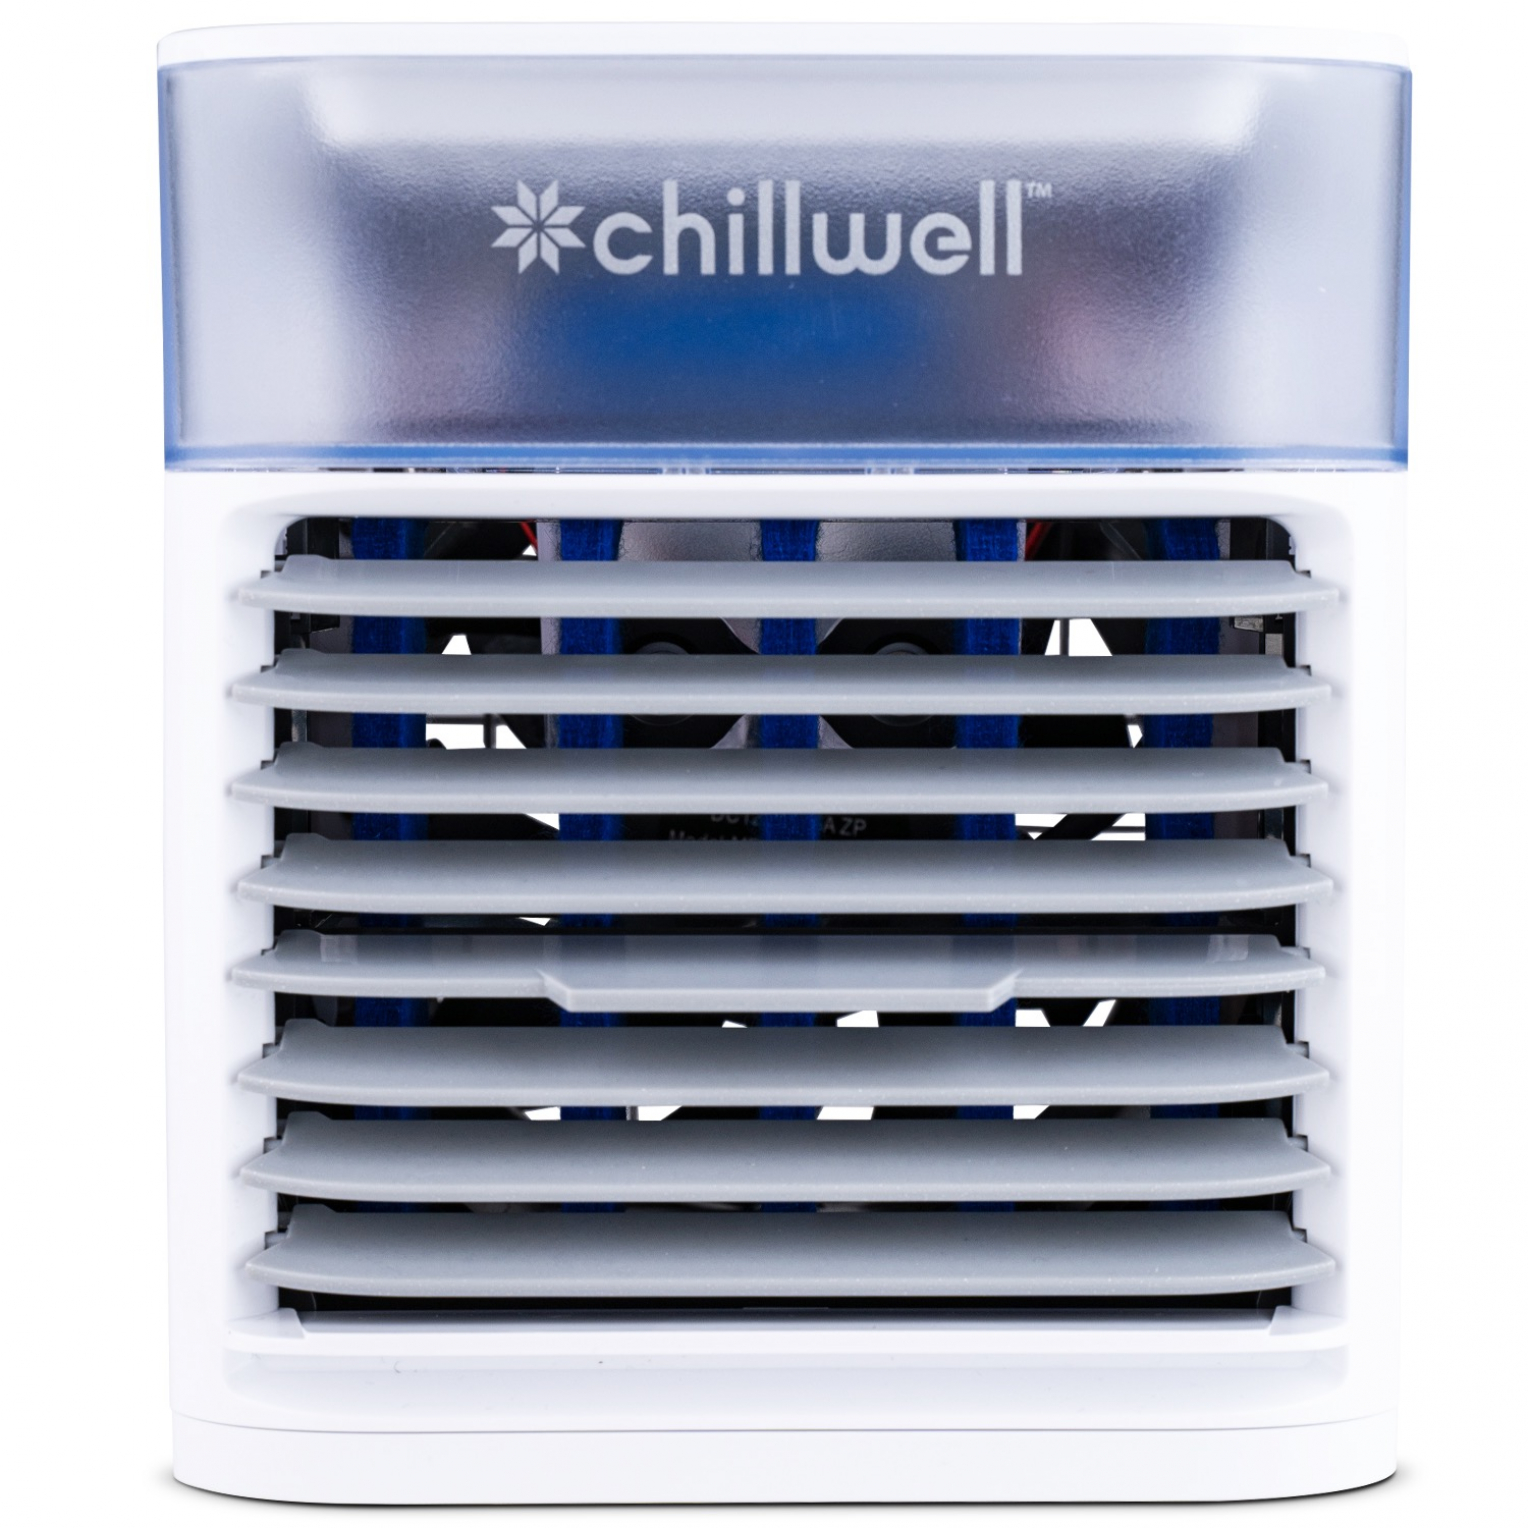 Chillwell Ac Portable Ac Reviews